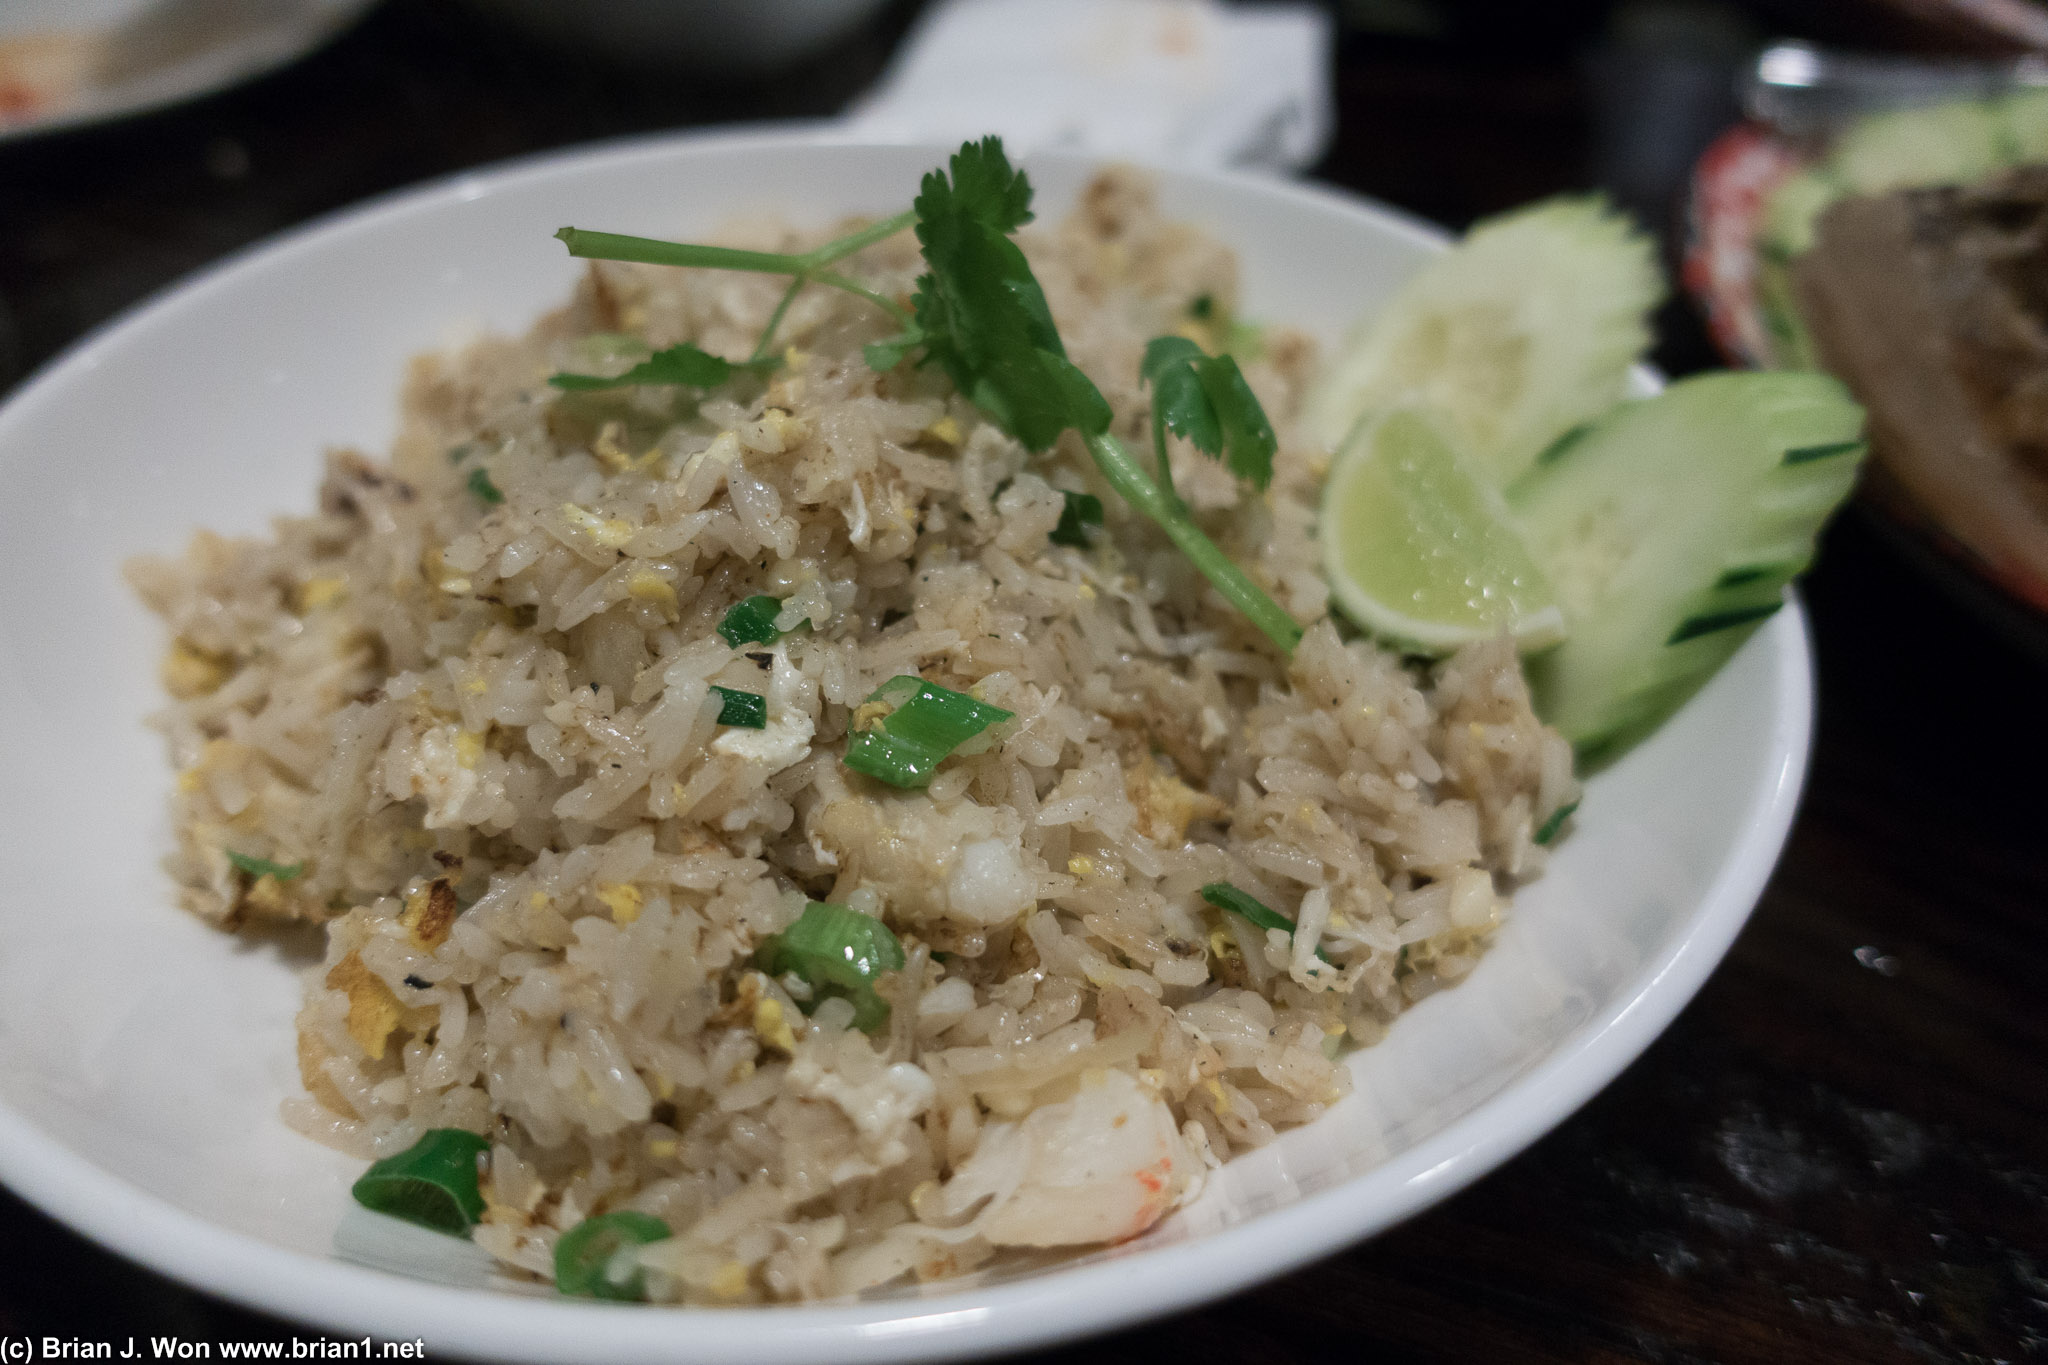 Crab fried rice. Kind of ordinary.